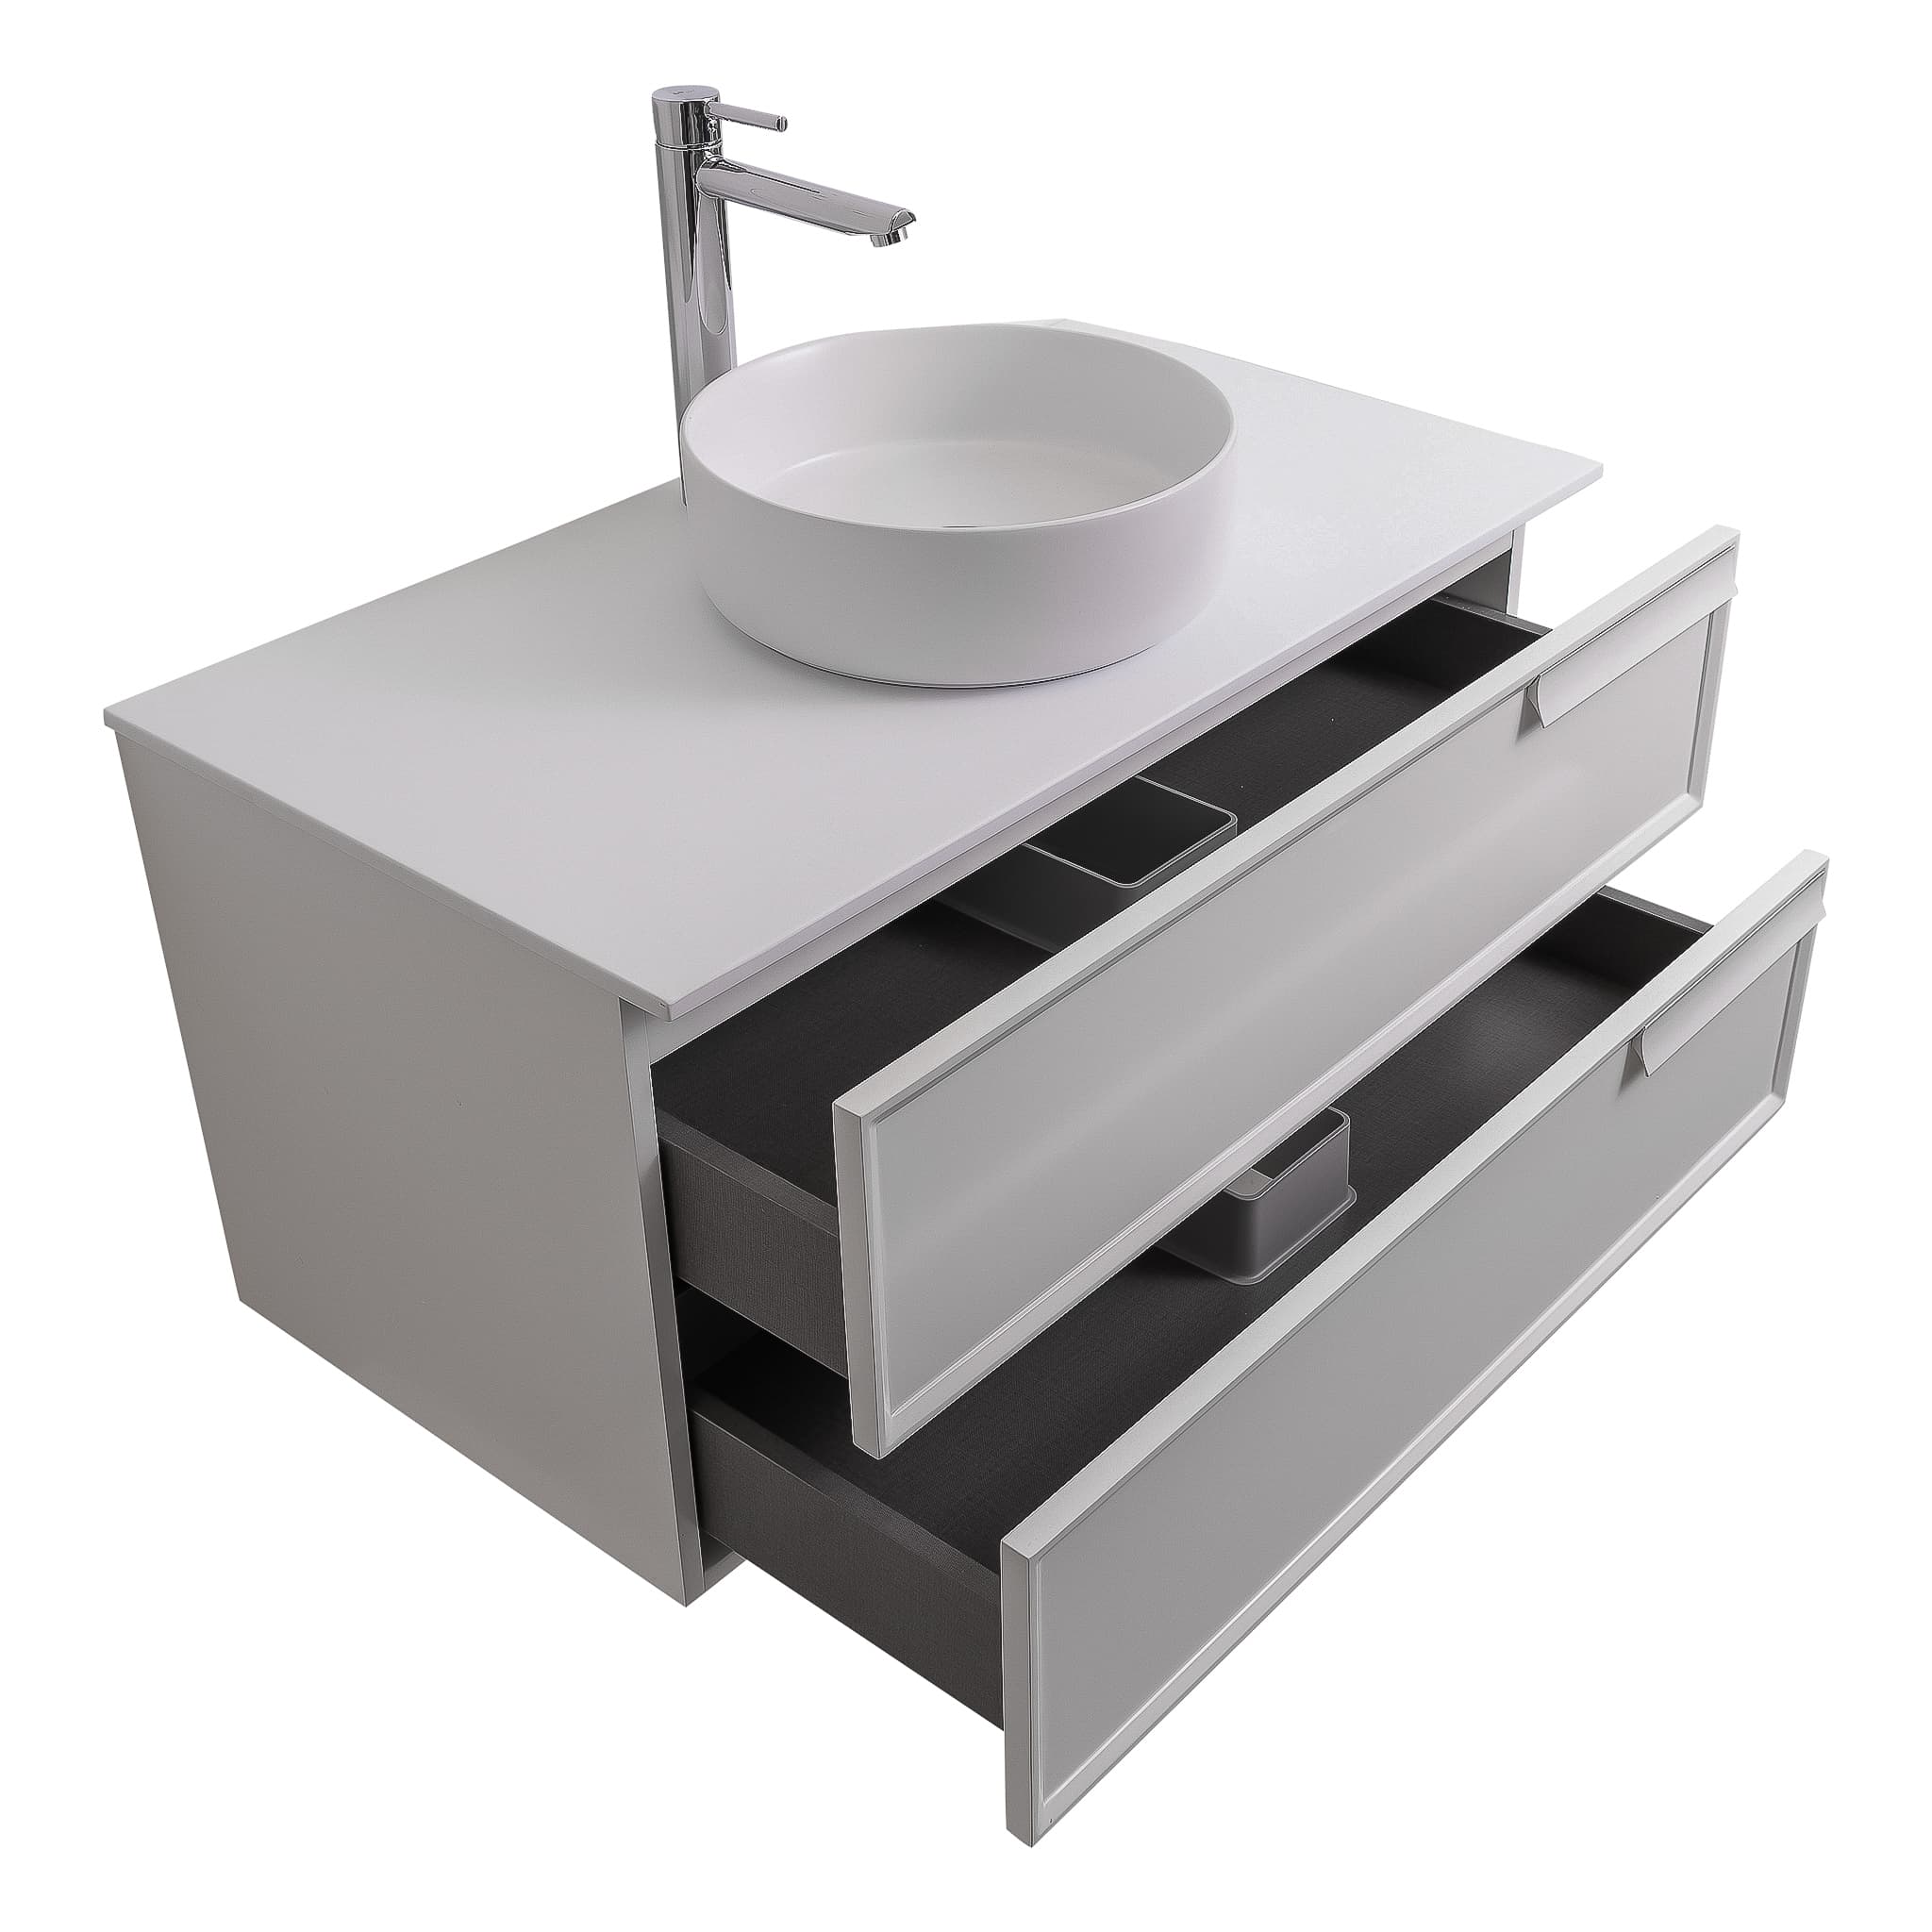 Garda 39.5 Matte White Cabinet, Ares White Top and Ares White Ceramic Basin, Wall Mounted Modern Vanity Set